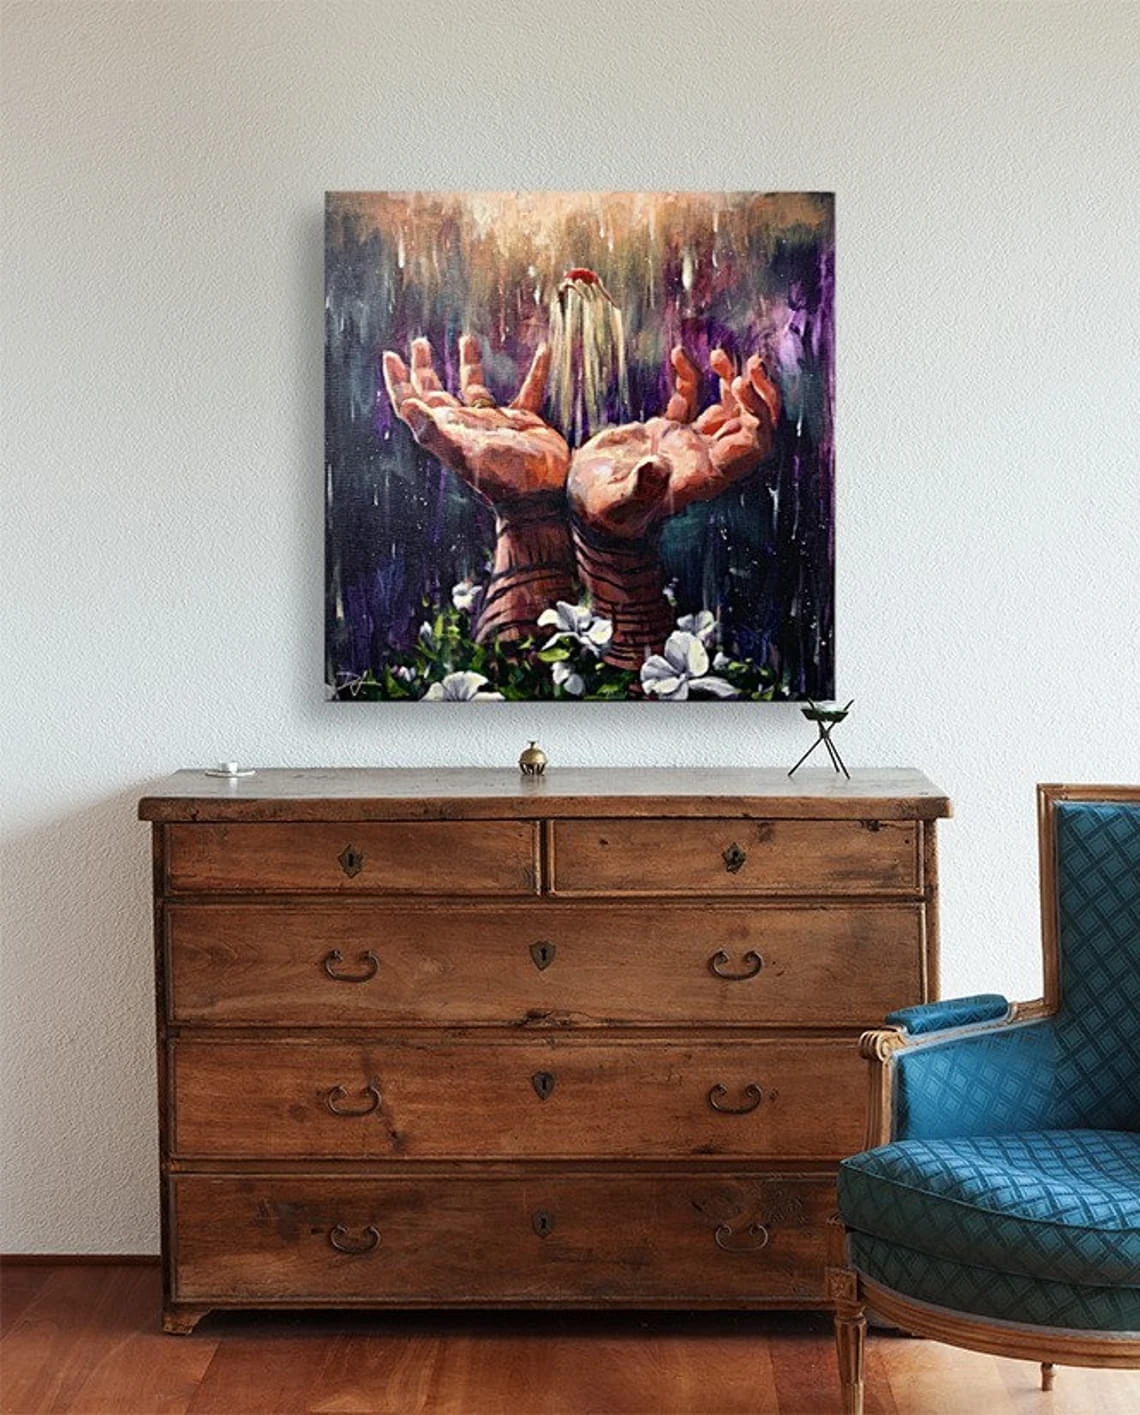 "The Fountain" - Surrealism Artwork Sample on Wall